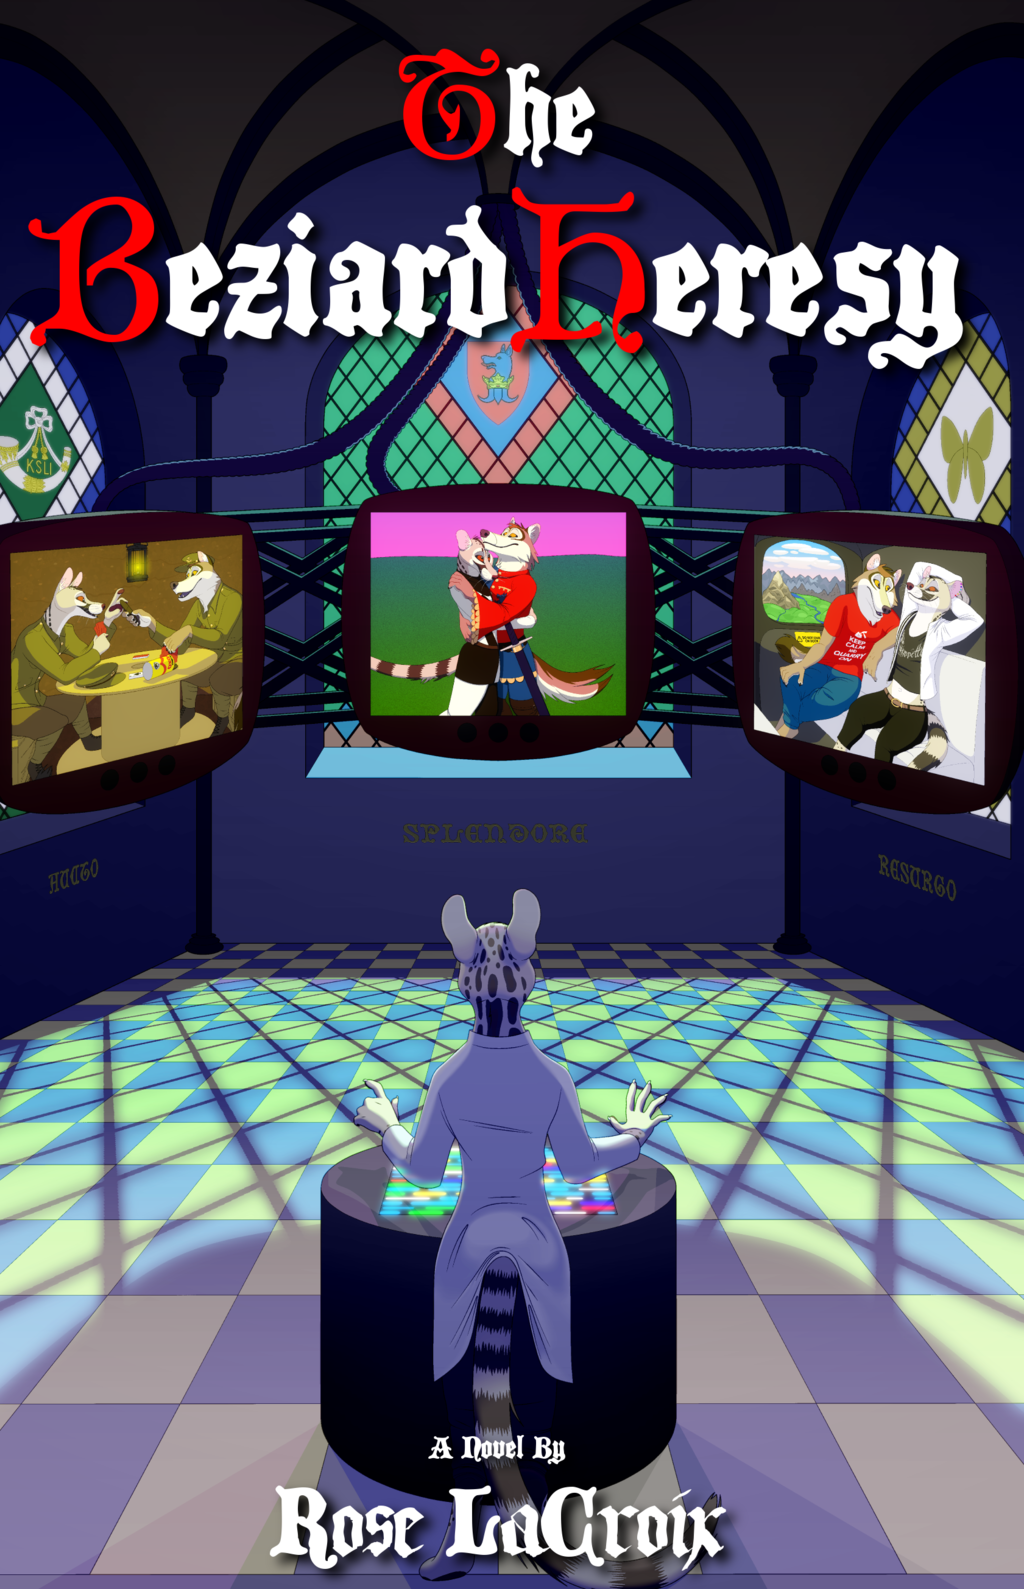 Most recent image: Announcement- The Beziard Heresy